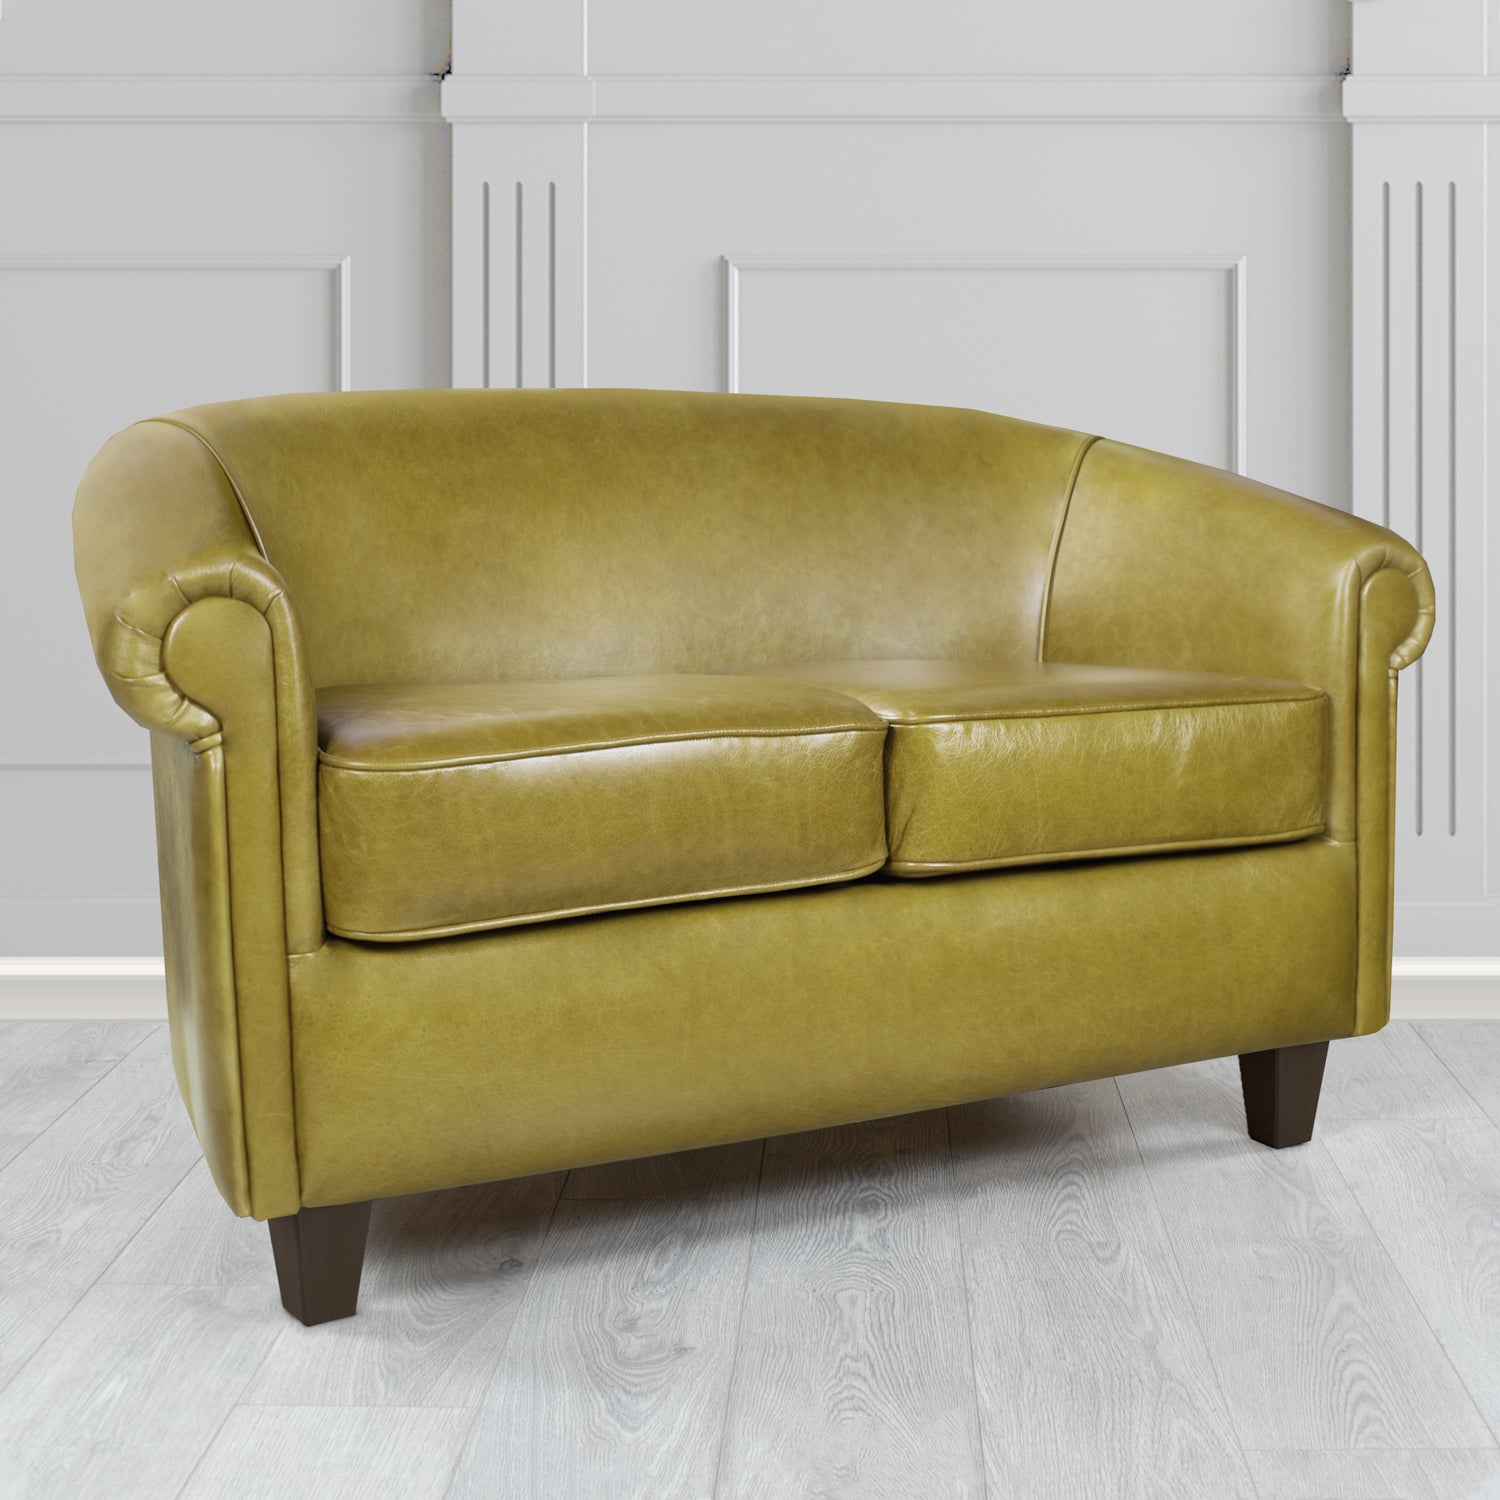 Siena 2 Seater Tub Sofa in Crib 5 Old English Olive Genuine Leather - The Tub Chair Shop